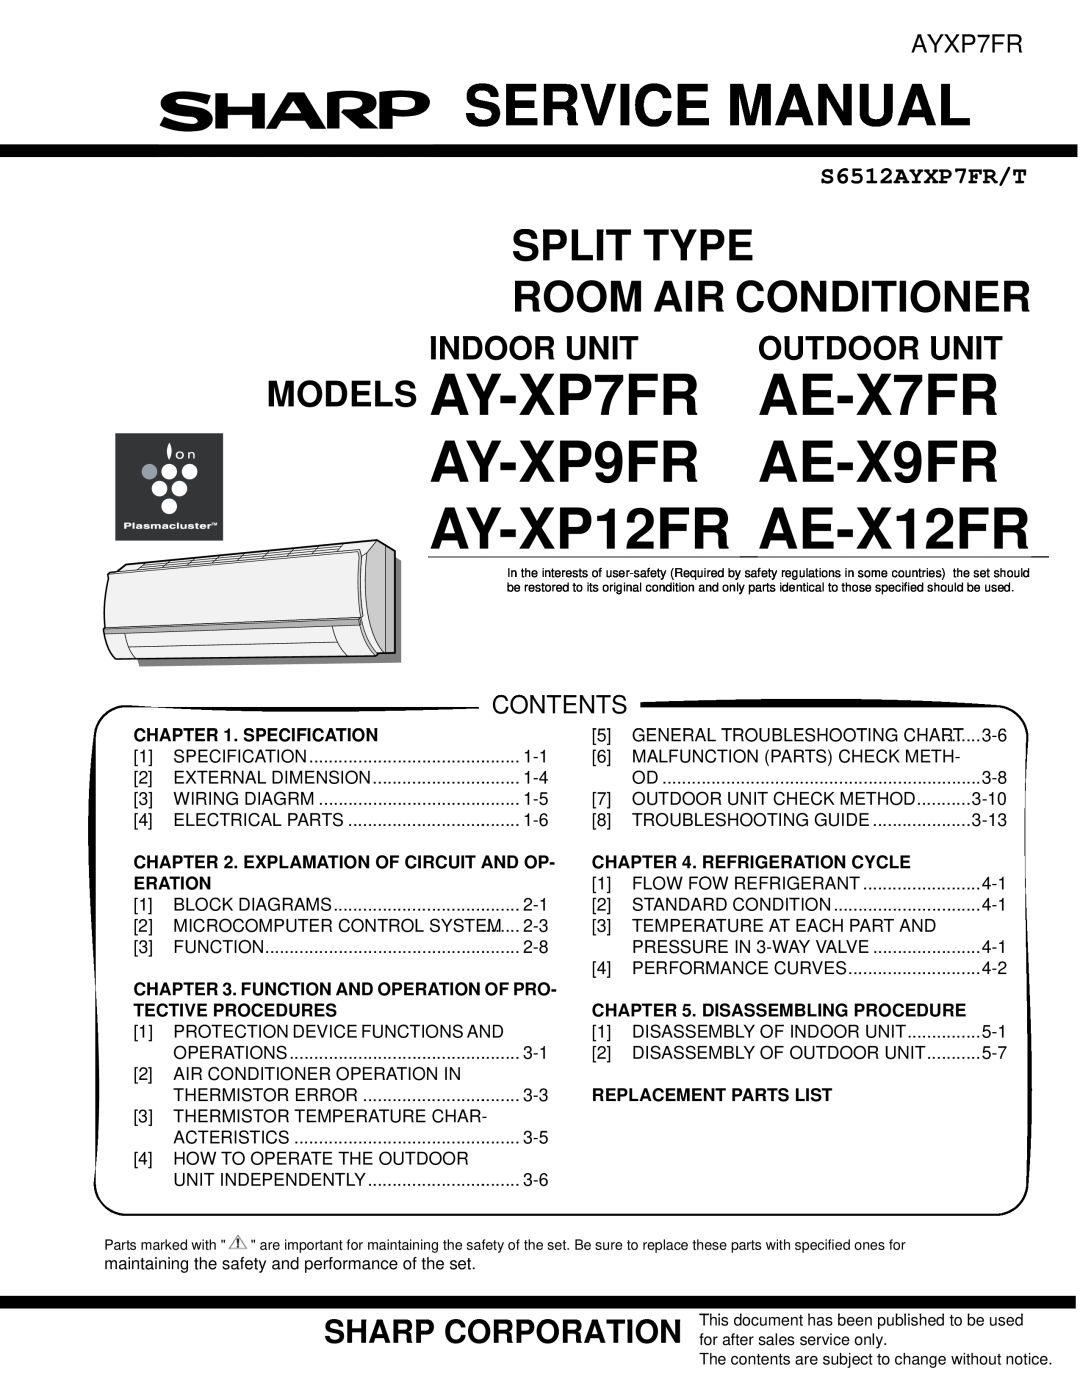 Sharp service manual Specification, Explamation Of Circuit And Op, Refrigeration Cycle, Eration, MODELS AY-XP7FR 